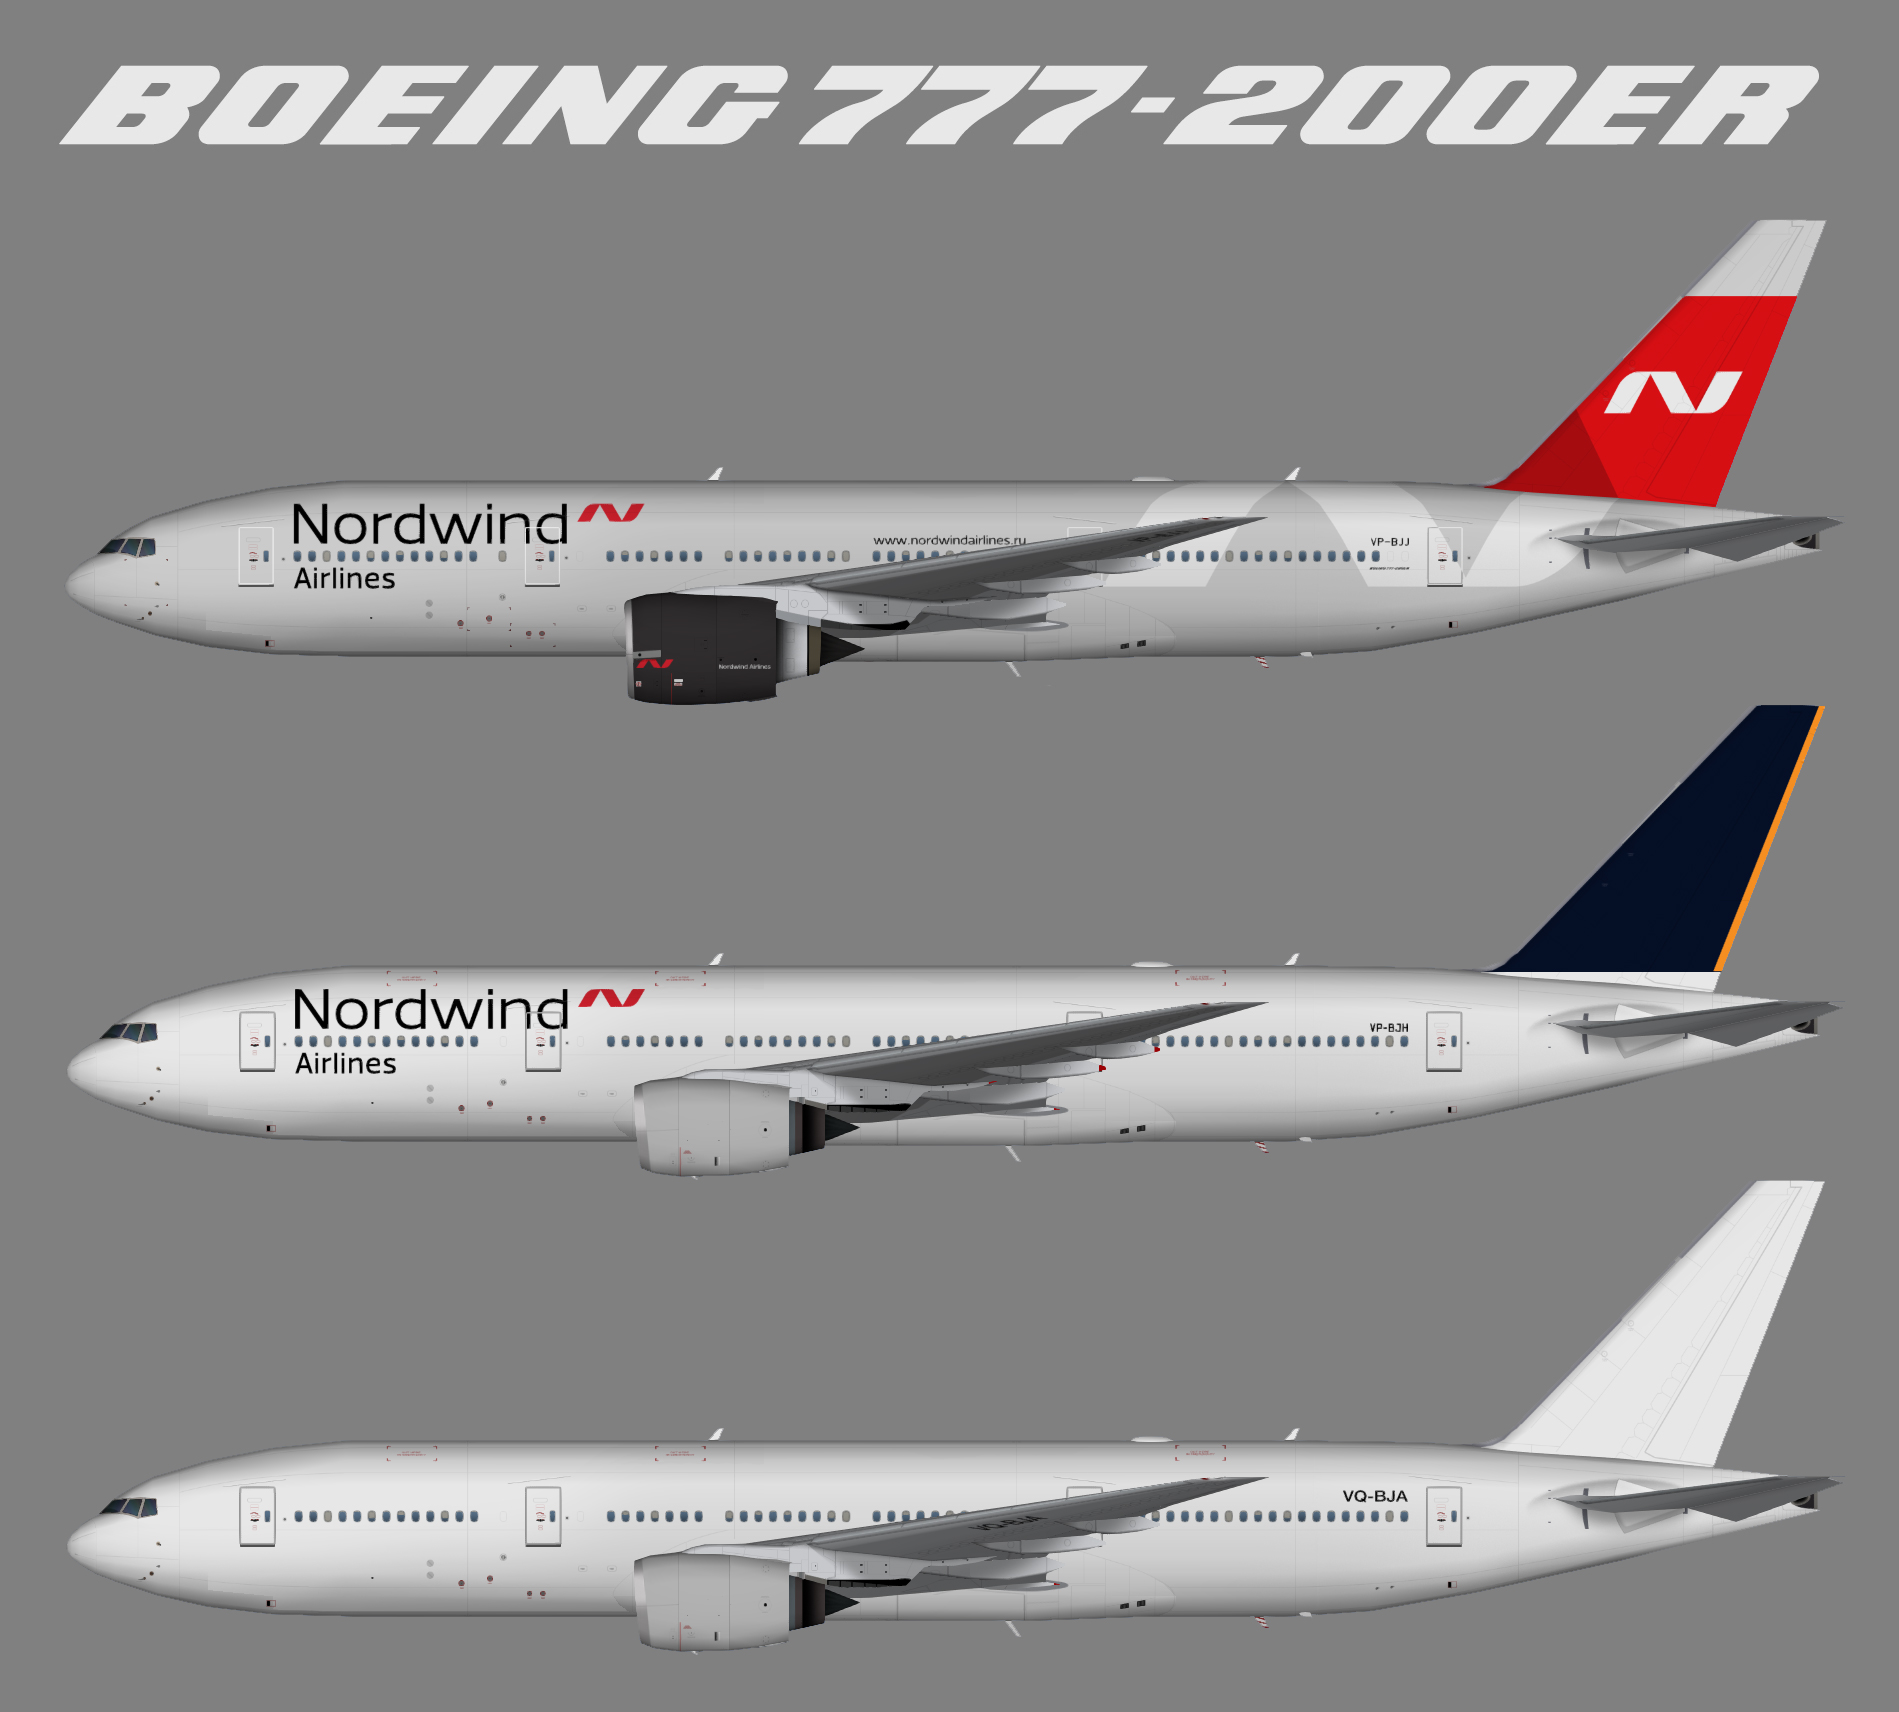 Southwind boeing 777